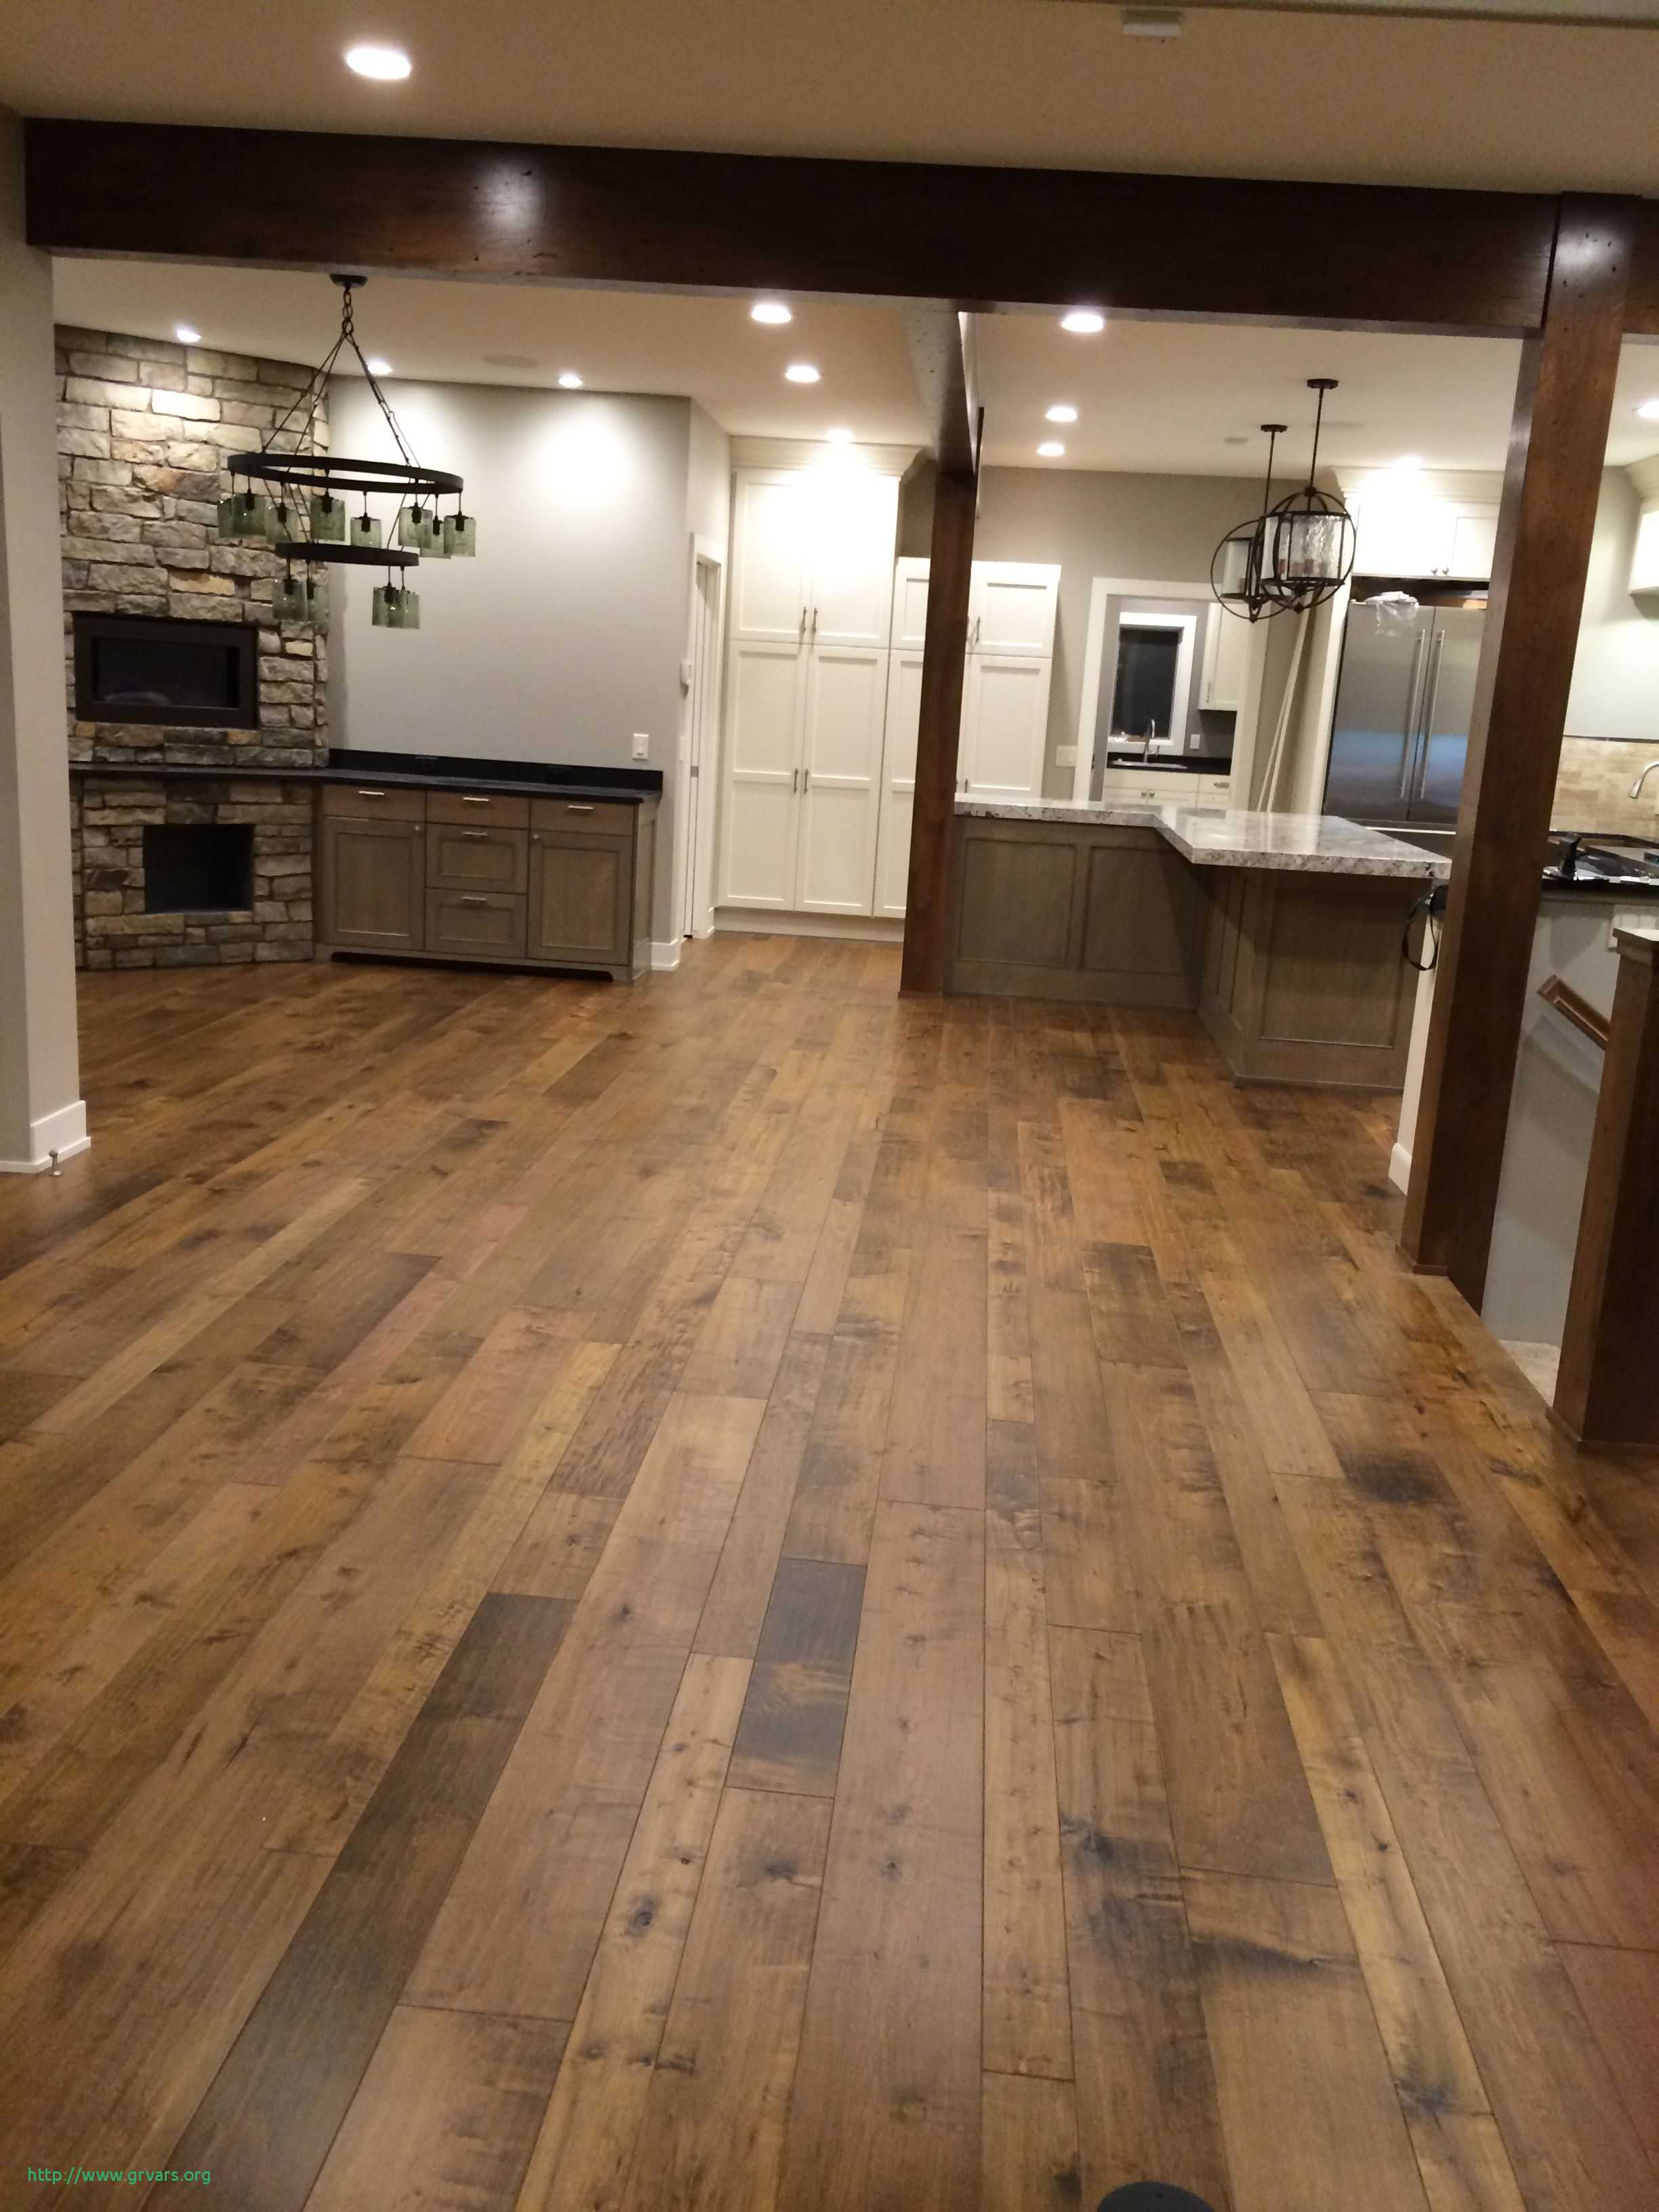 13 Spectacular Hardwood Flooring Fayetteville Nc 2022 free download hardwood flooring fayetteville nc of 21 ac289lagant flooring stores in st louis mo ideas blog throughout flooring stores in st louis mo frais monterey hardwood collection rooms and spaces